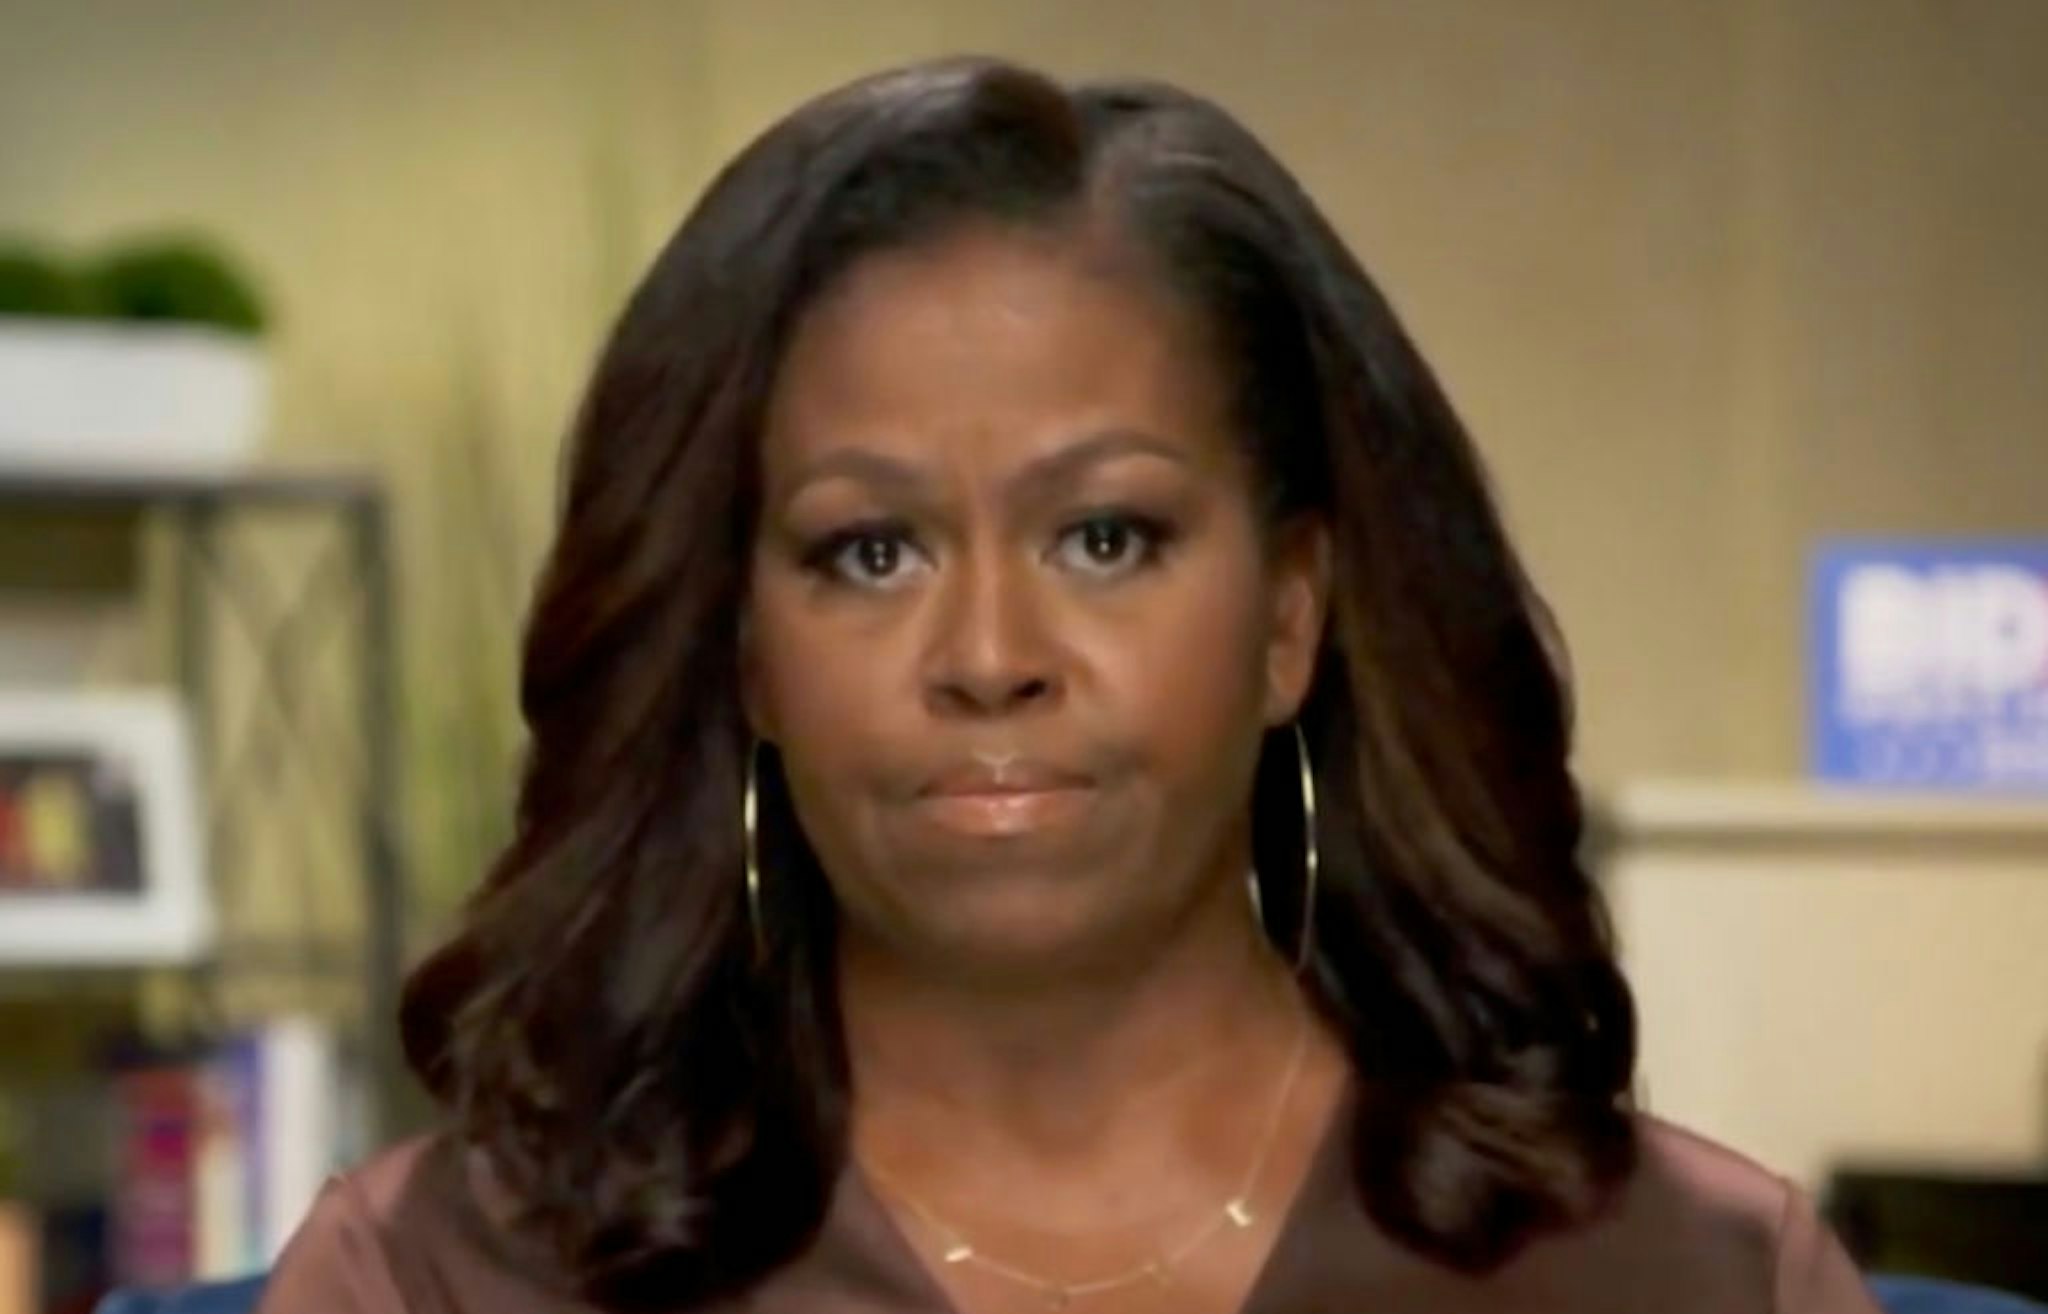 In this screenshot from the DNCC‚Äôs livestream of the 2020 Democratic National Convention, Former First Lady Michelle Obama addresses the virtual convention on August 17, 2020. The convention, which was once expected to draw 50,000 people to Milwaukee, Wisconsin, is now taking place virtually due to the coronavirus pandemic. (Photo by Handout/DNCC via Getty Images)